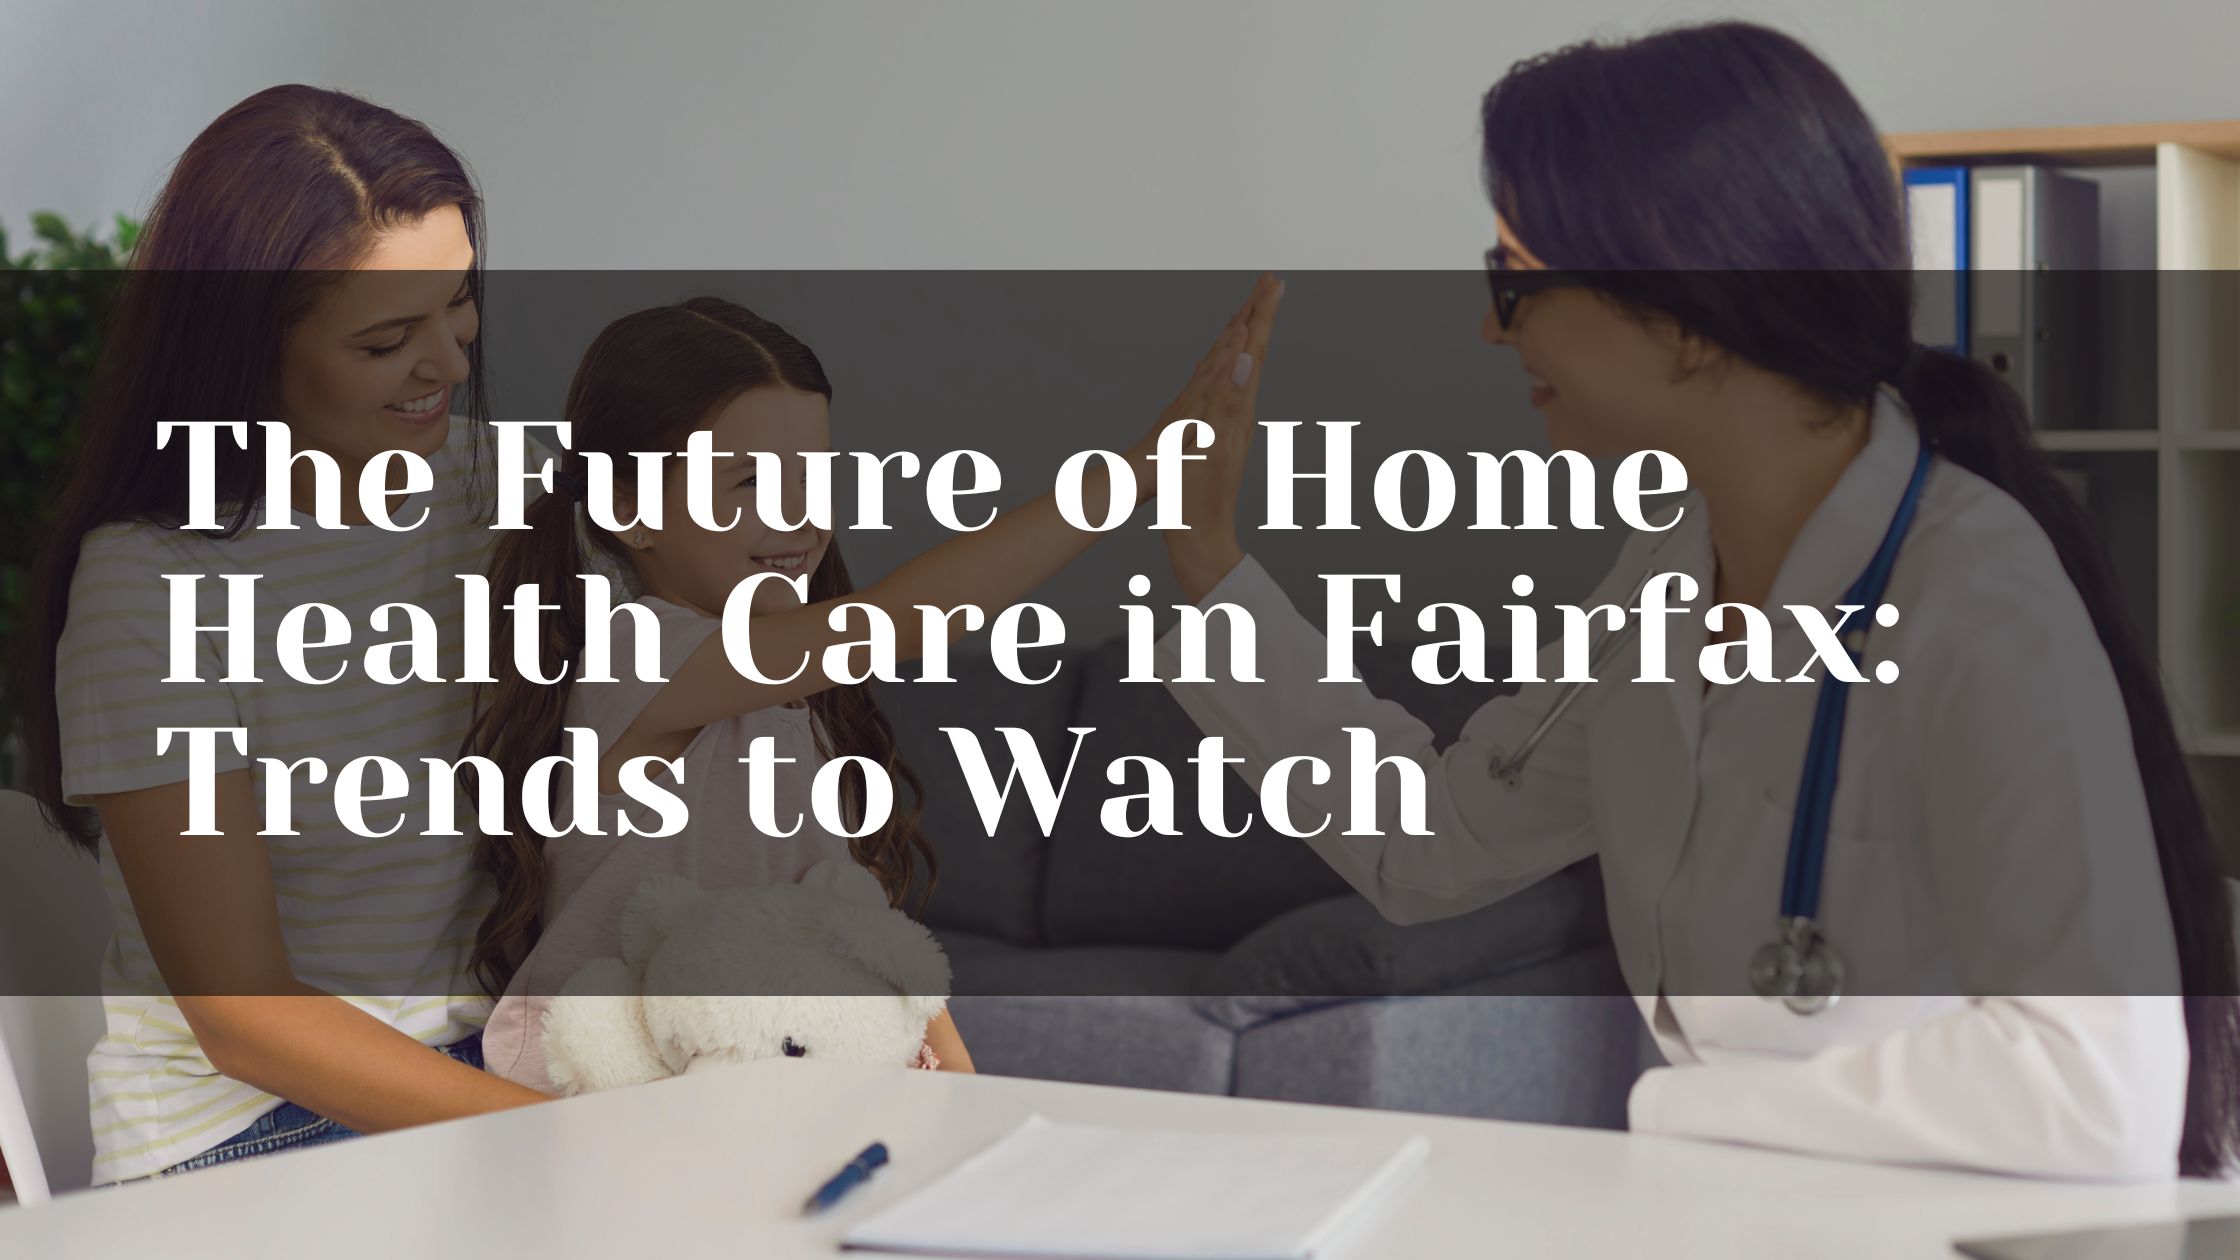 The Future of Home Health Care in Fairfax: Trends to Watch